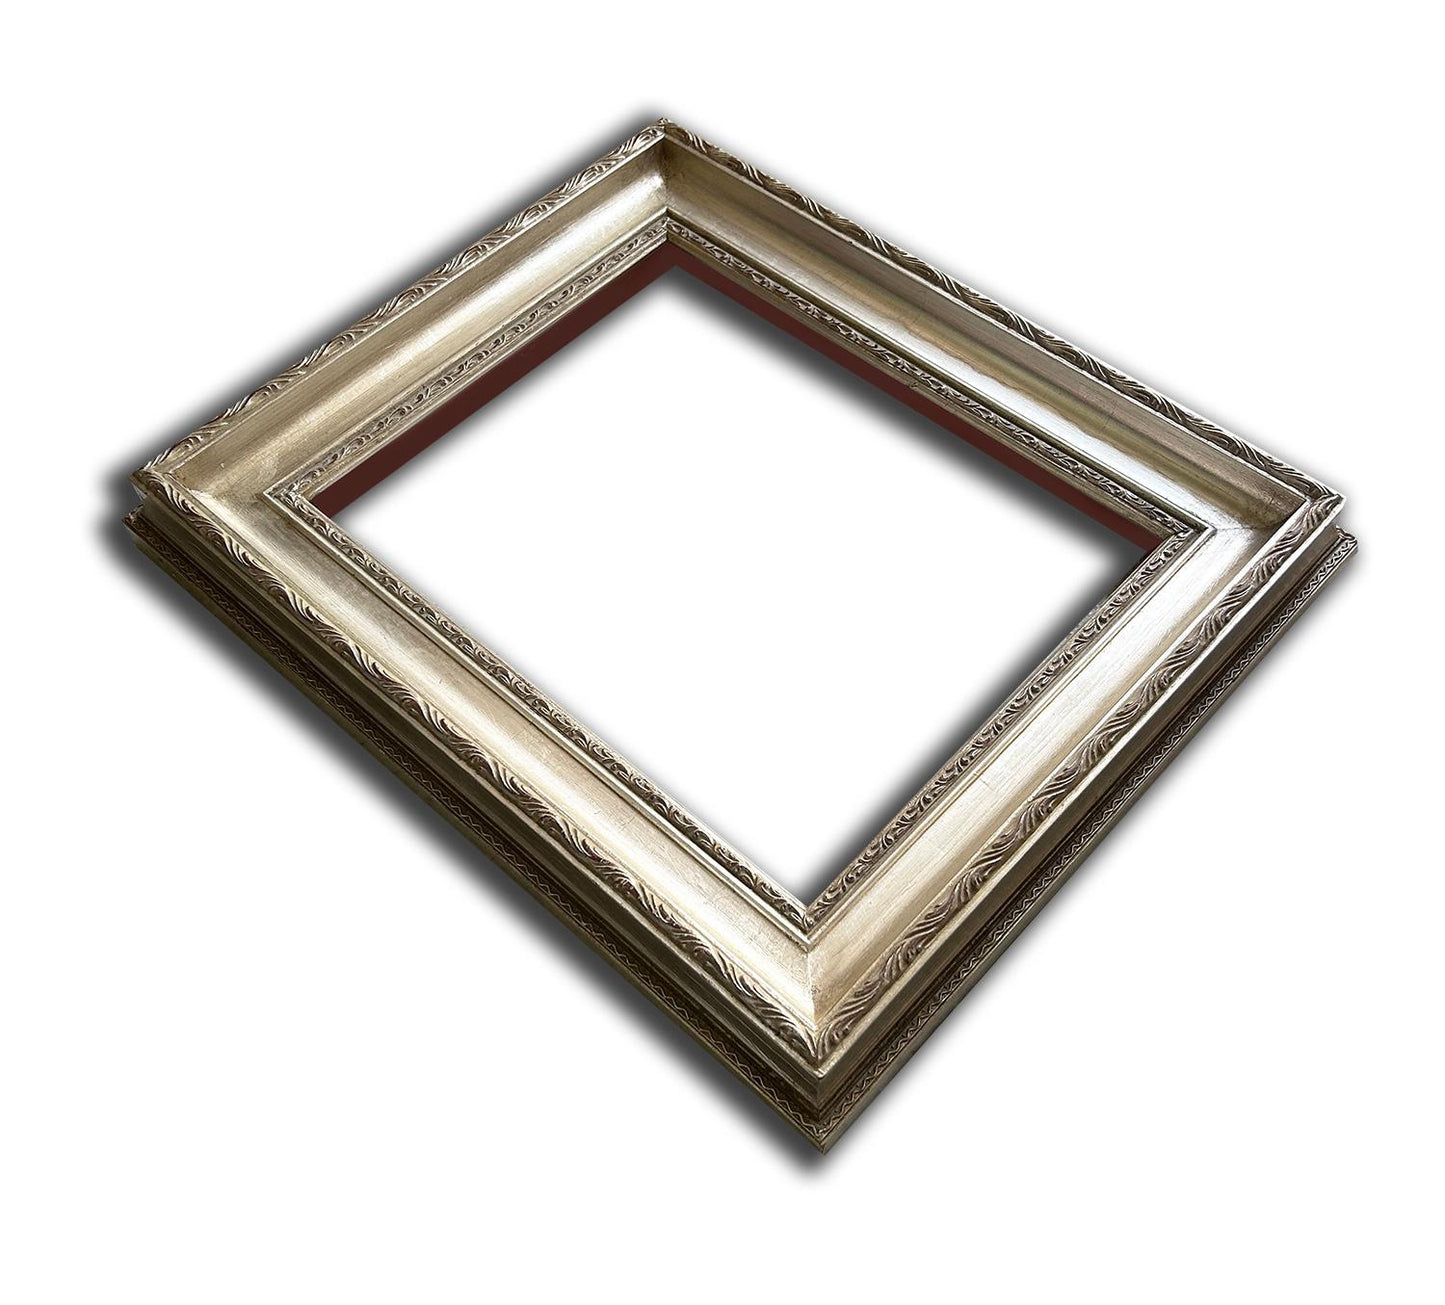 28x36 cm or 11x14 ins, wooden photo frame